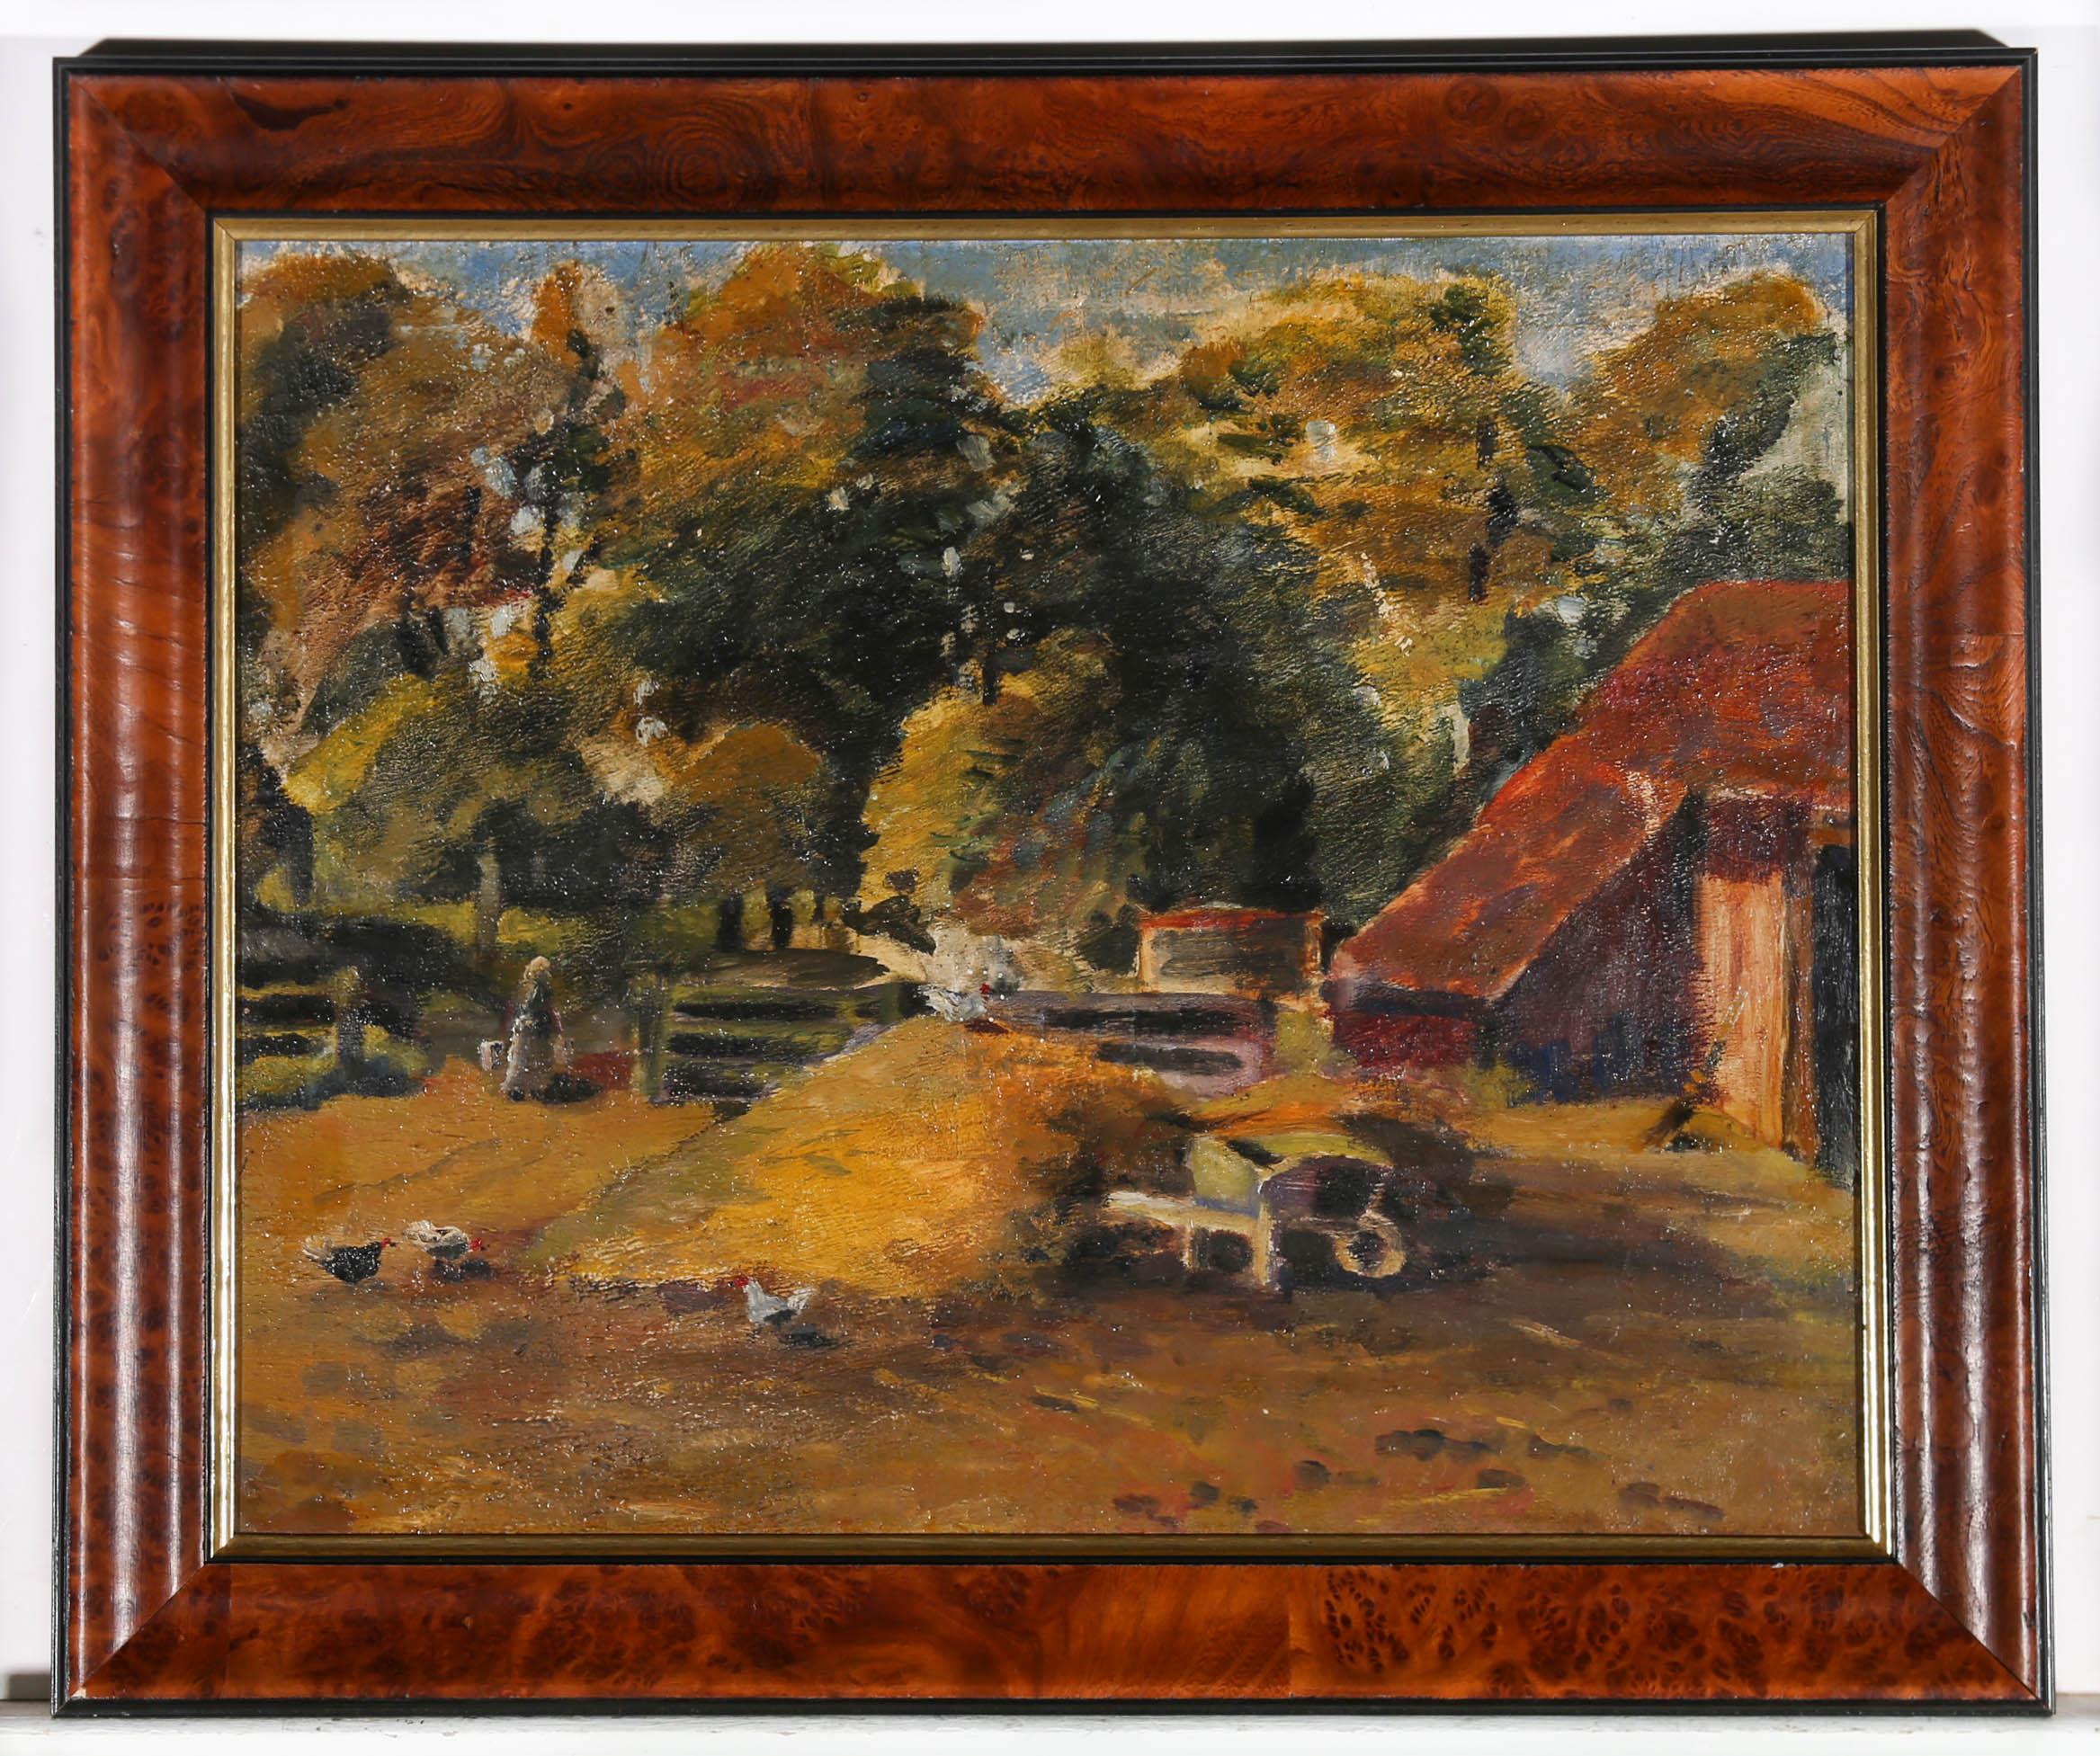 This charming farmyard scene depicts a milk maid starting her daily business and carrying pails away from the cottage, In the foreground chickens graze around a wheelbarrow before tall trees. the artist seems to draw on inspiration from 1930's